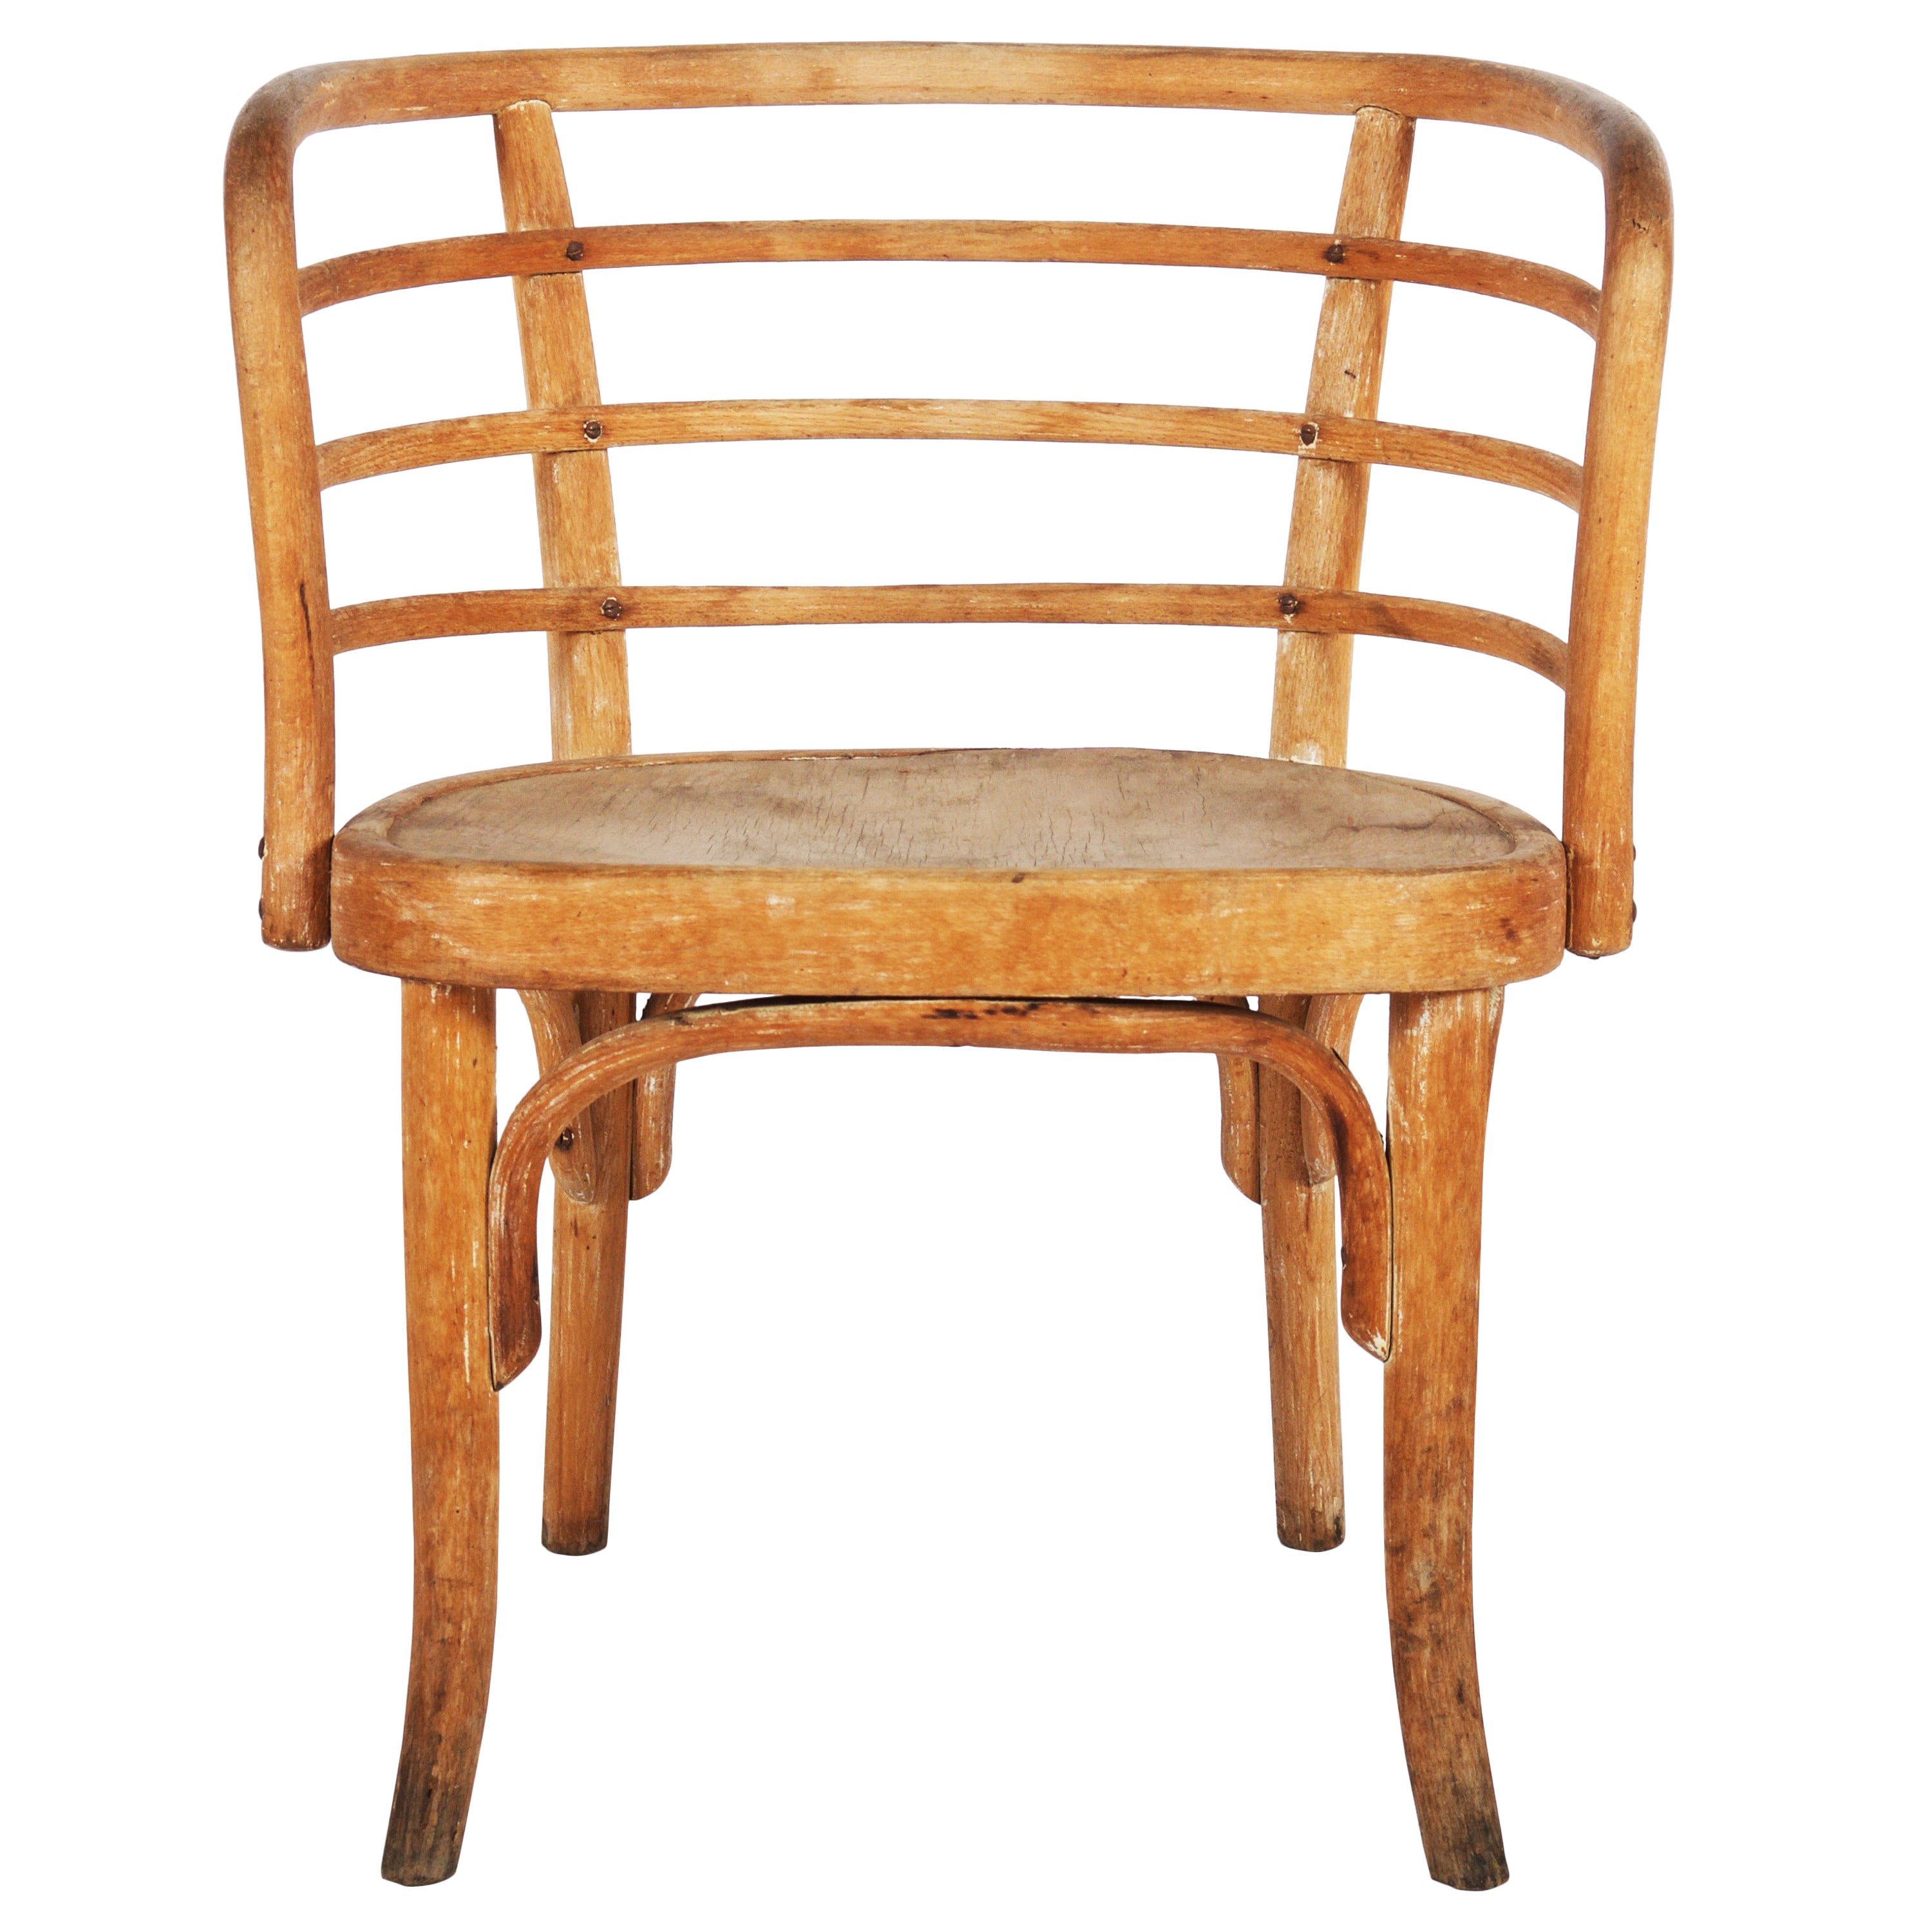 Rare Thonet Armchair Attributed to Josef Frank